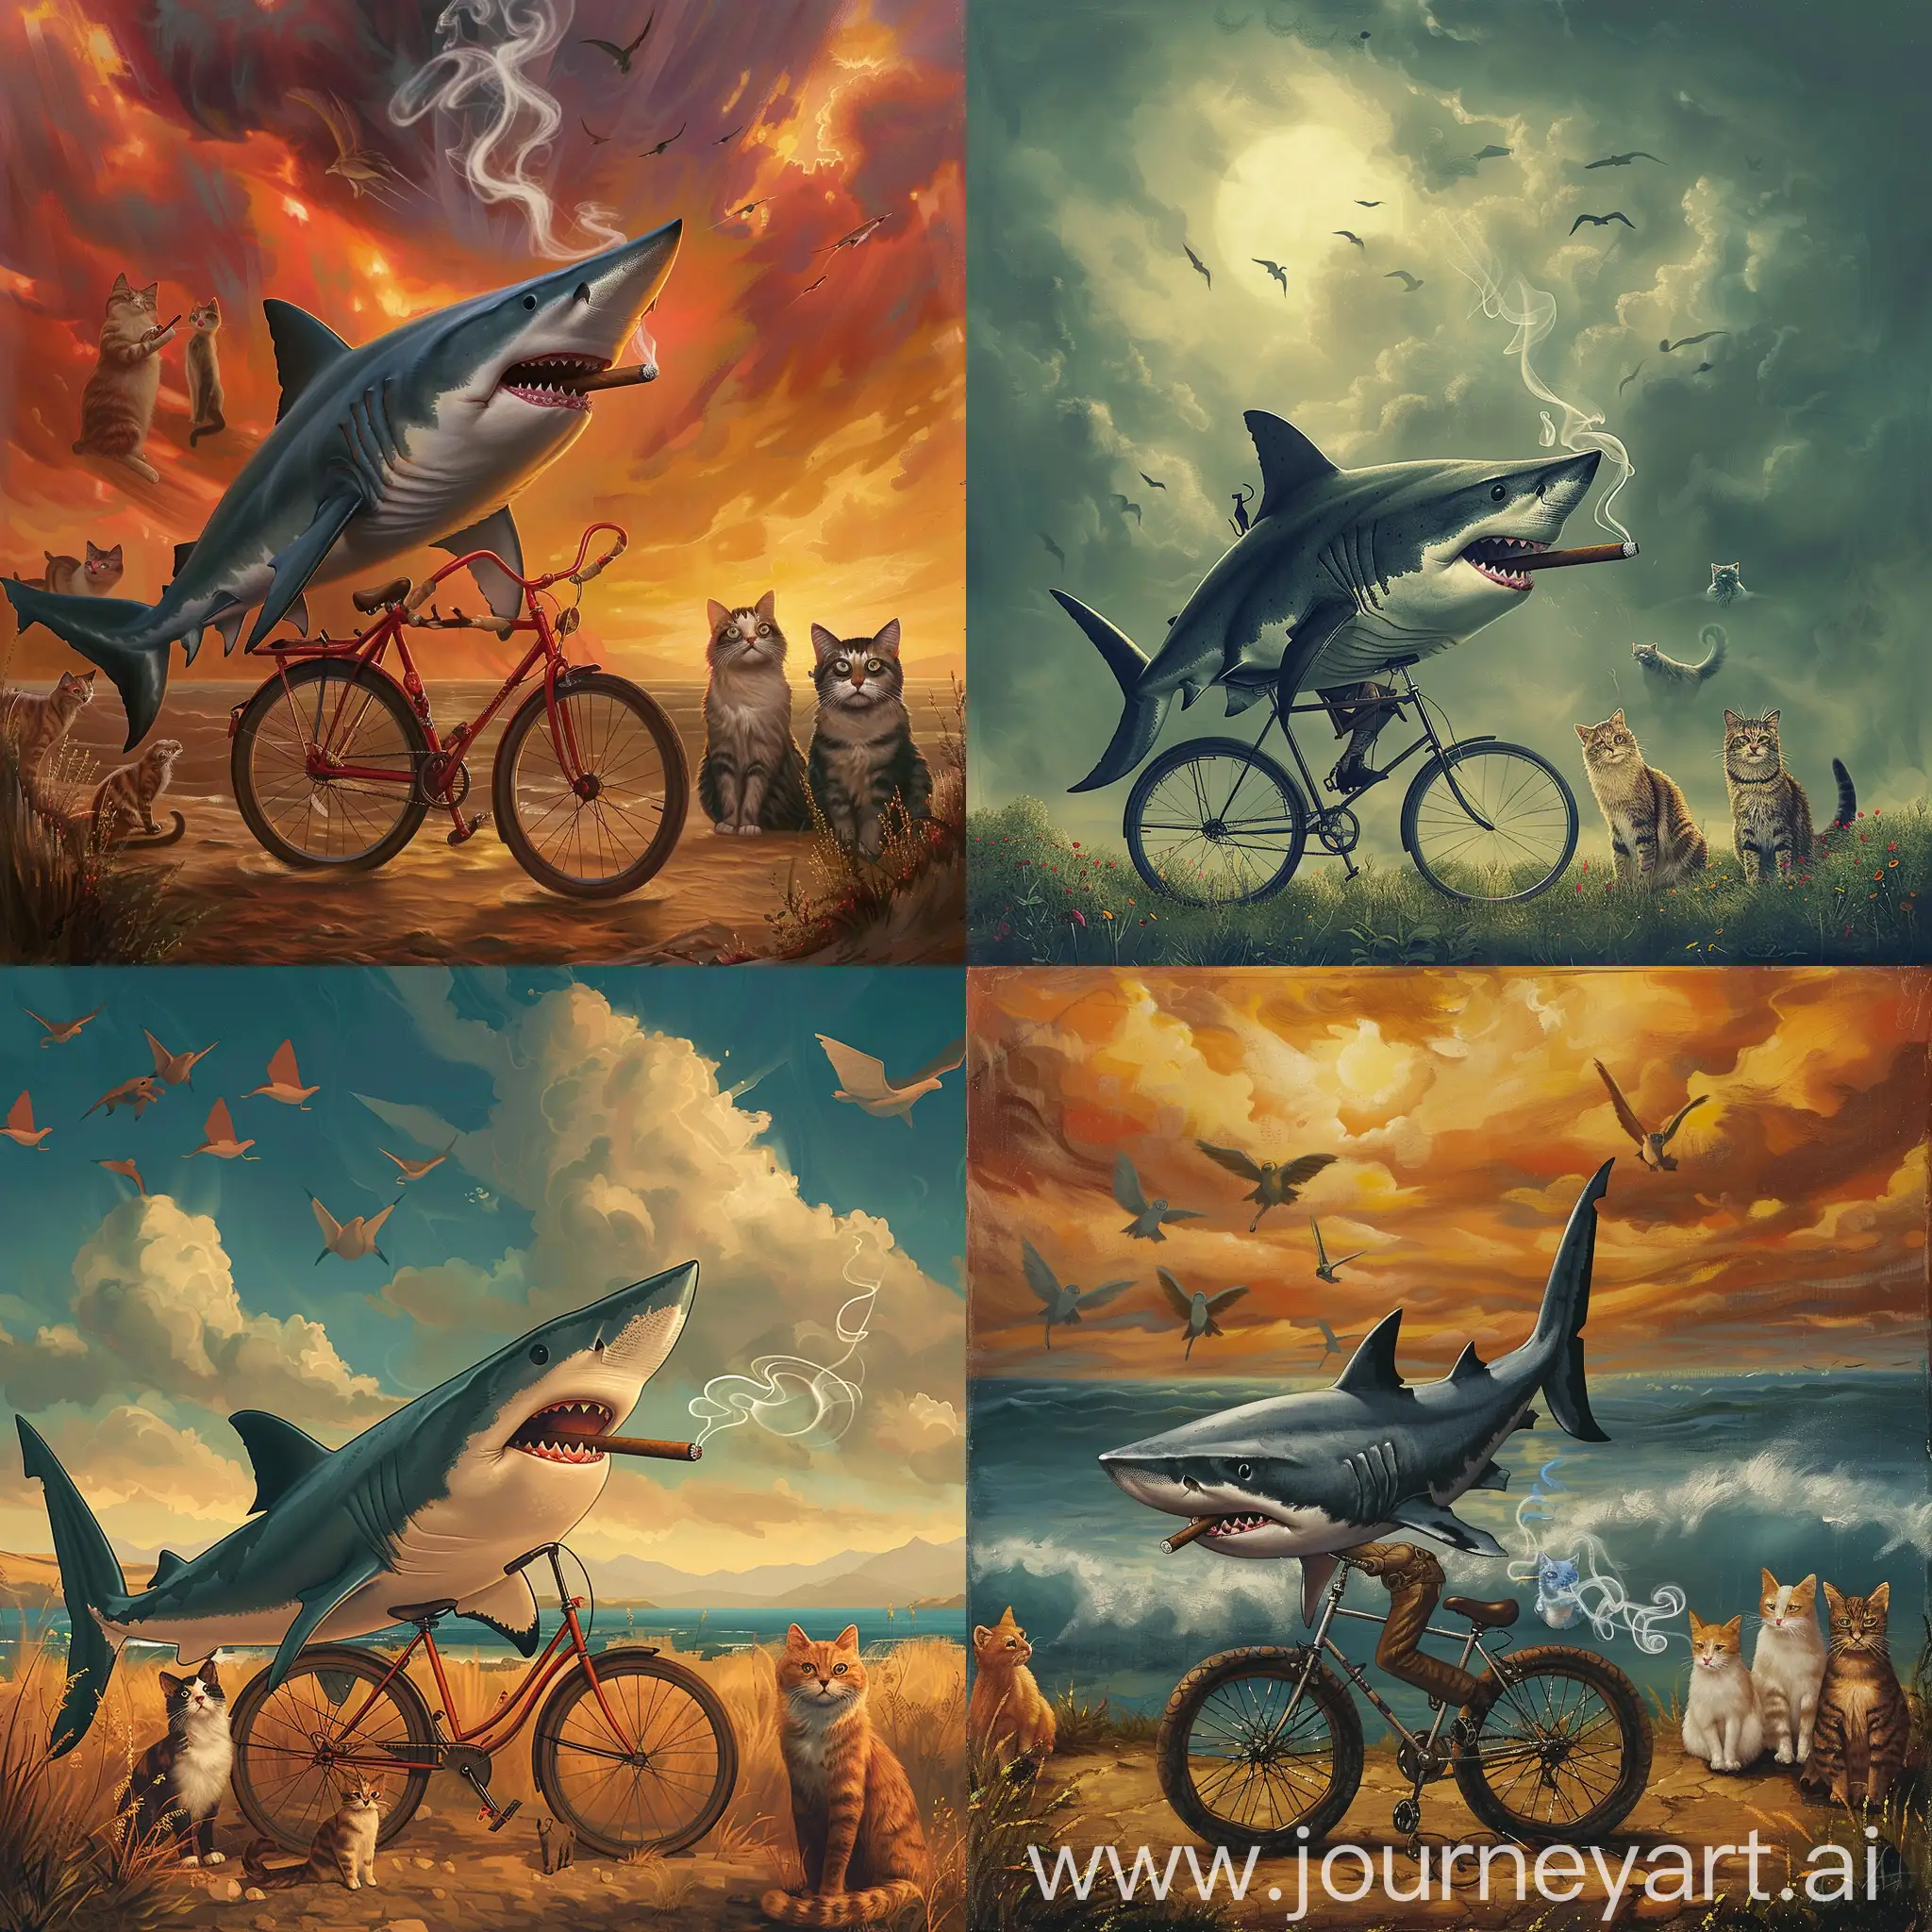 Shark-Riding-Bicycle-Smoking-Cigar-Watched-by-Cats